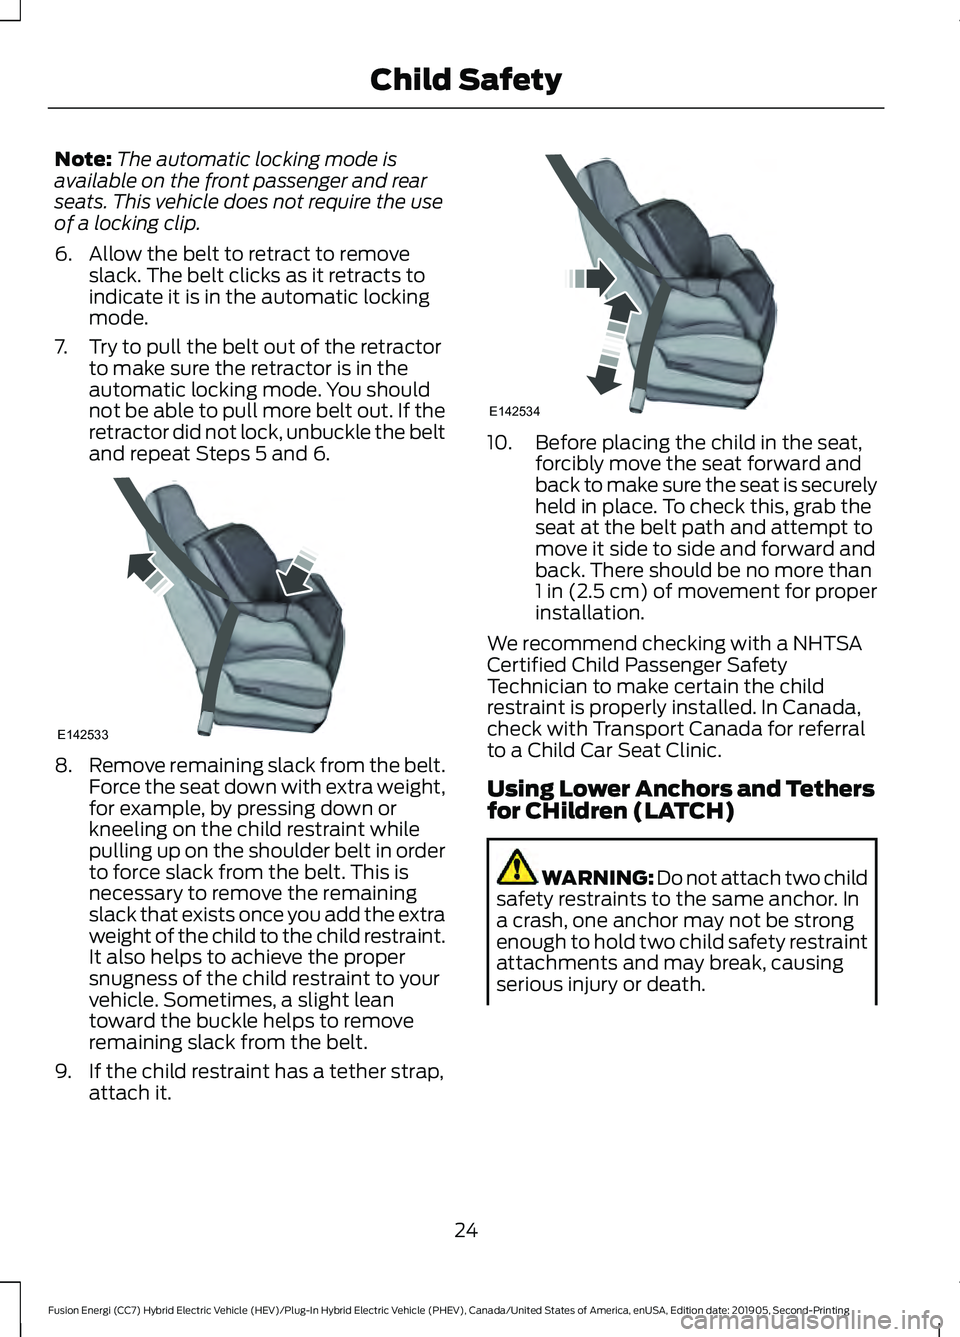 FORD FUSION ENERGI 2020  Owners Manual Note:
The automatic locking mode is
available on the front passenger and rear
seats. This vehicle does not require the use
of a locking clip.
6. Allow the belt to retract to remove slack. The belt cli